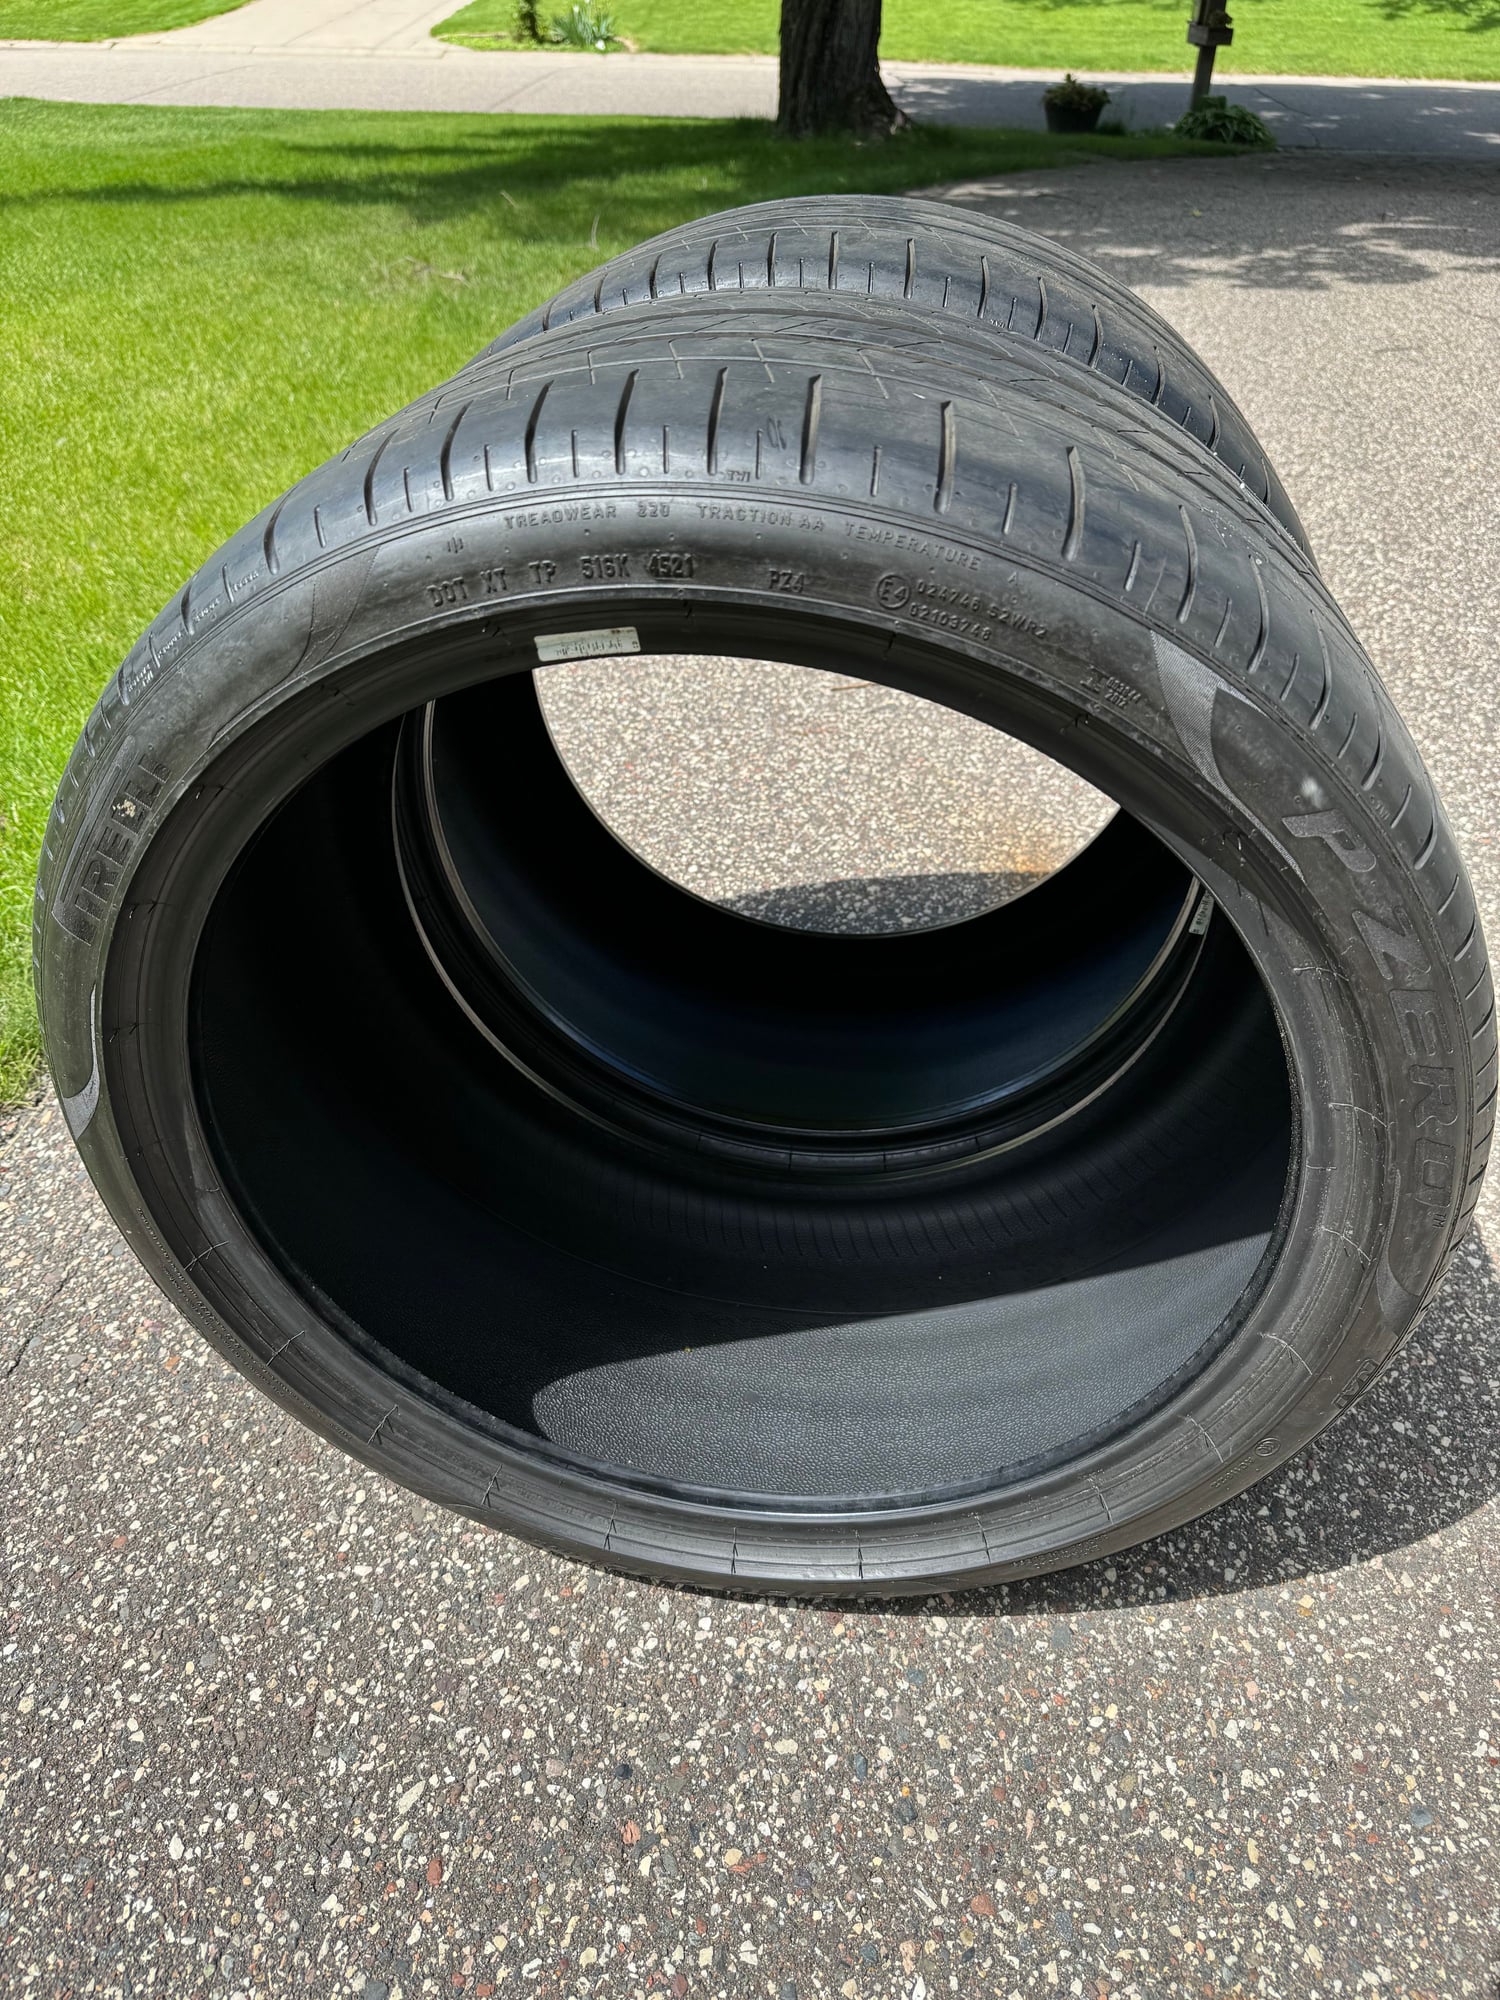 Wheels and Tires/Axles - Original 992 20/21" Pirelli PZero PZ4 Summer Tires - 90%+ Tread - Used - -1 to 2025  All Models - Chanhassen, MN 55317, United States